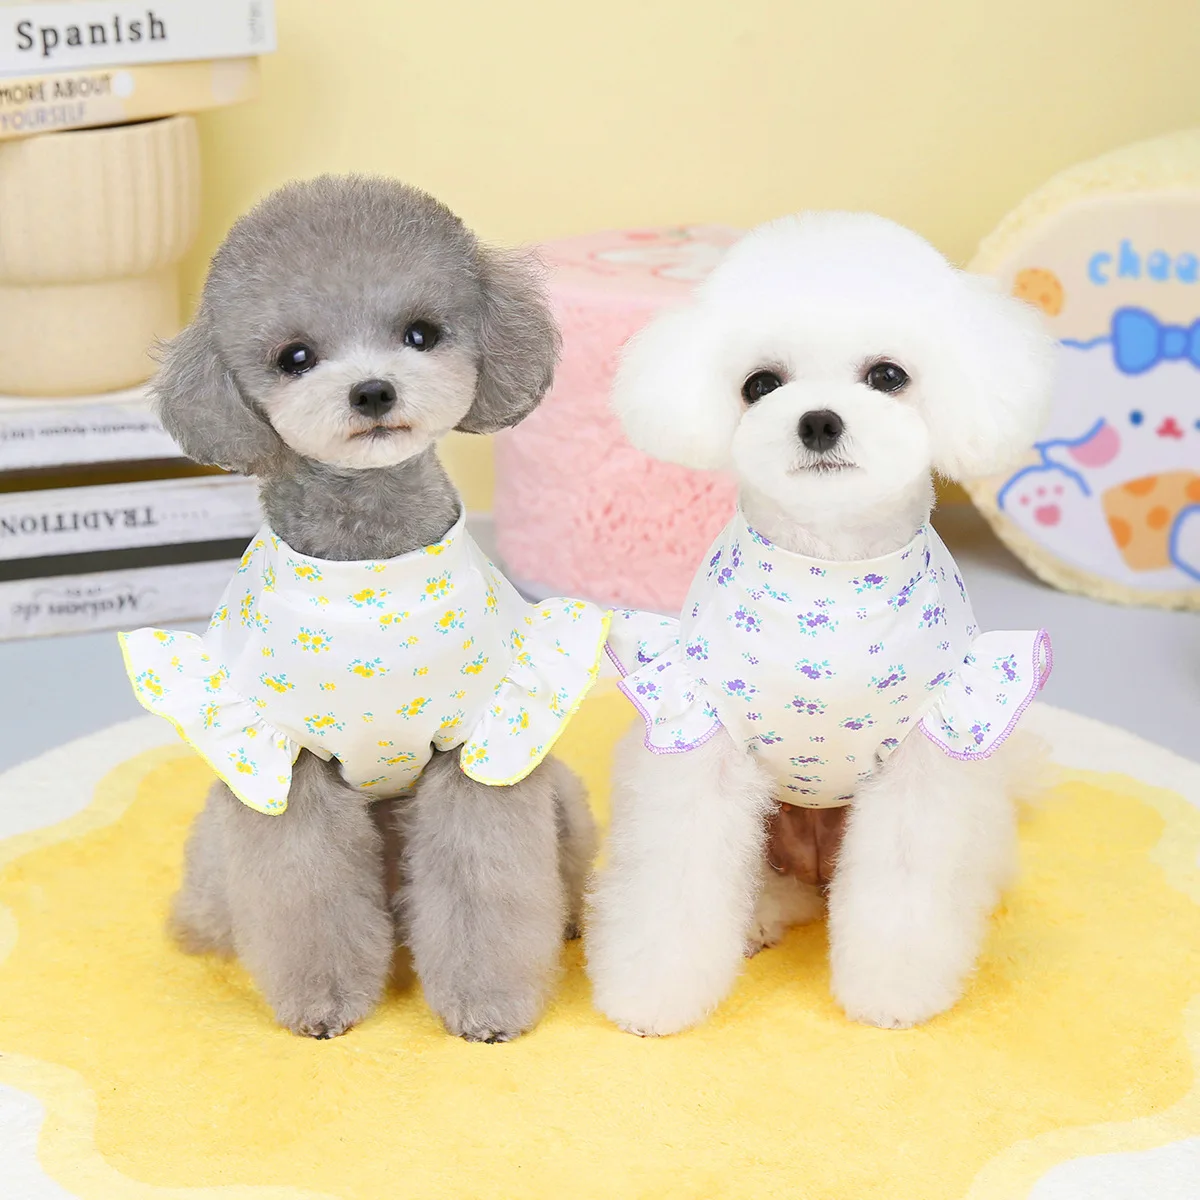 

Flying Sleeves Small Fresh Style Pet Dog Undershirt Clothes Teddy Bichon Flying Sleeve Undershirt Pet Clothes Spring and Summer